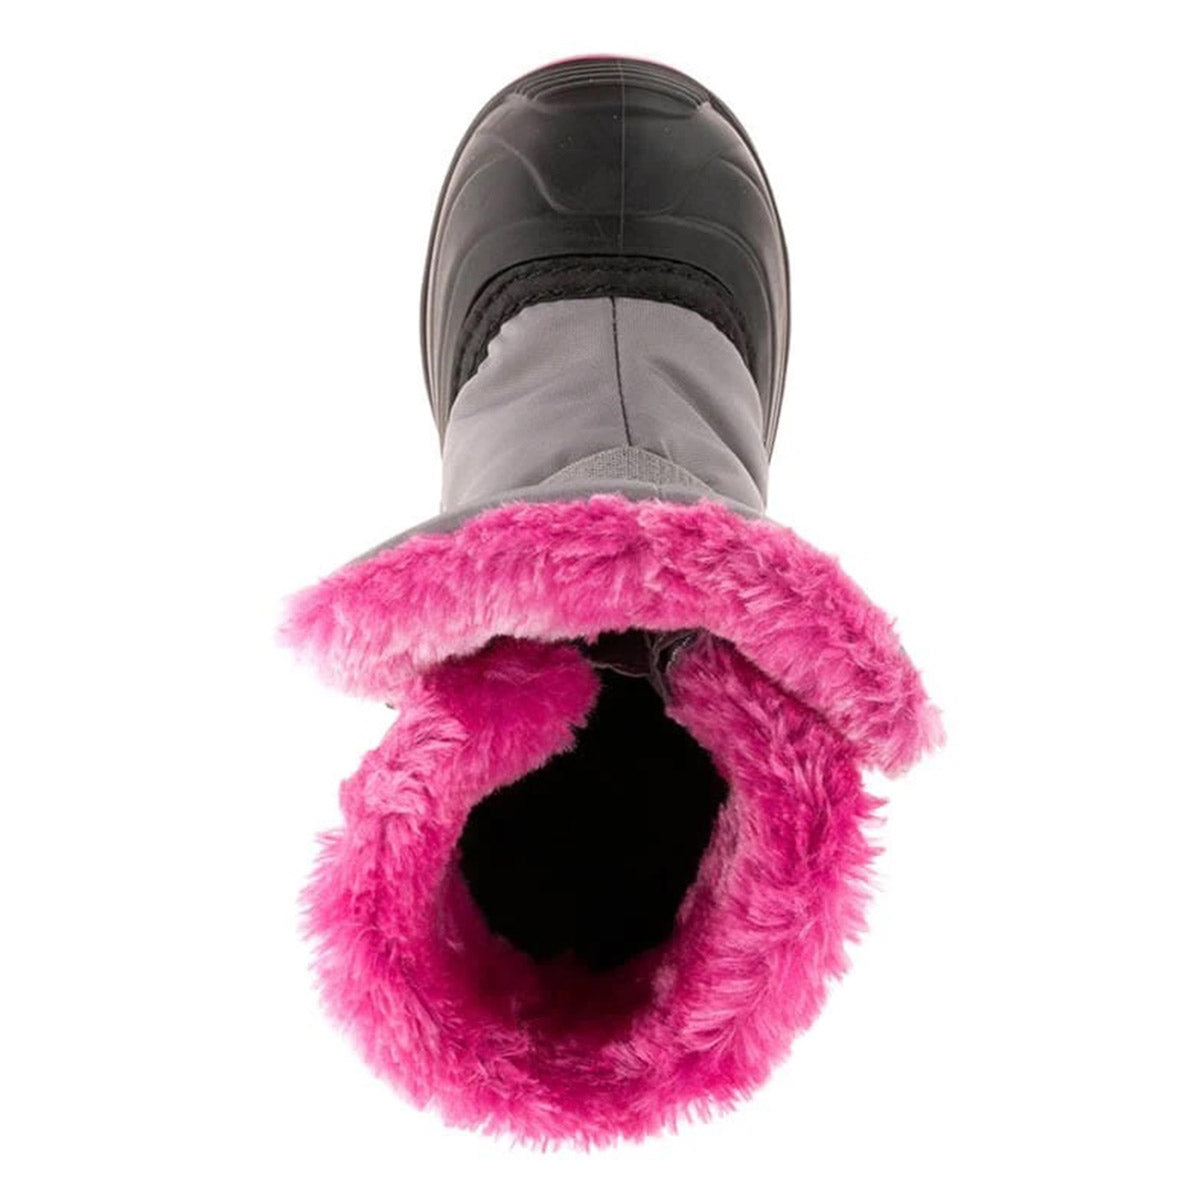 Top-down view of a single Kamik Snowbug F Mid Grey snowboot for toddlers with pink faux fur lining.